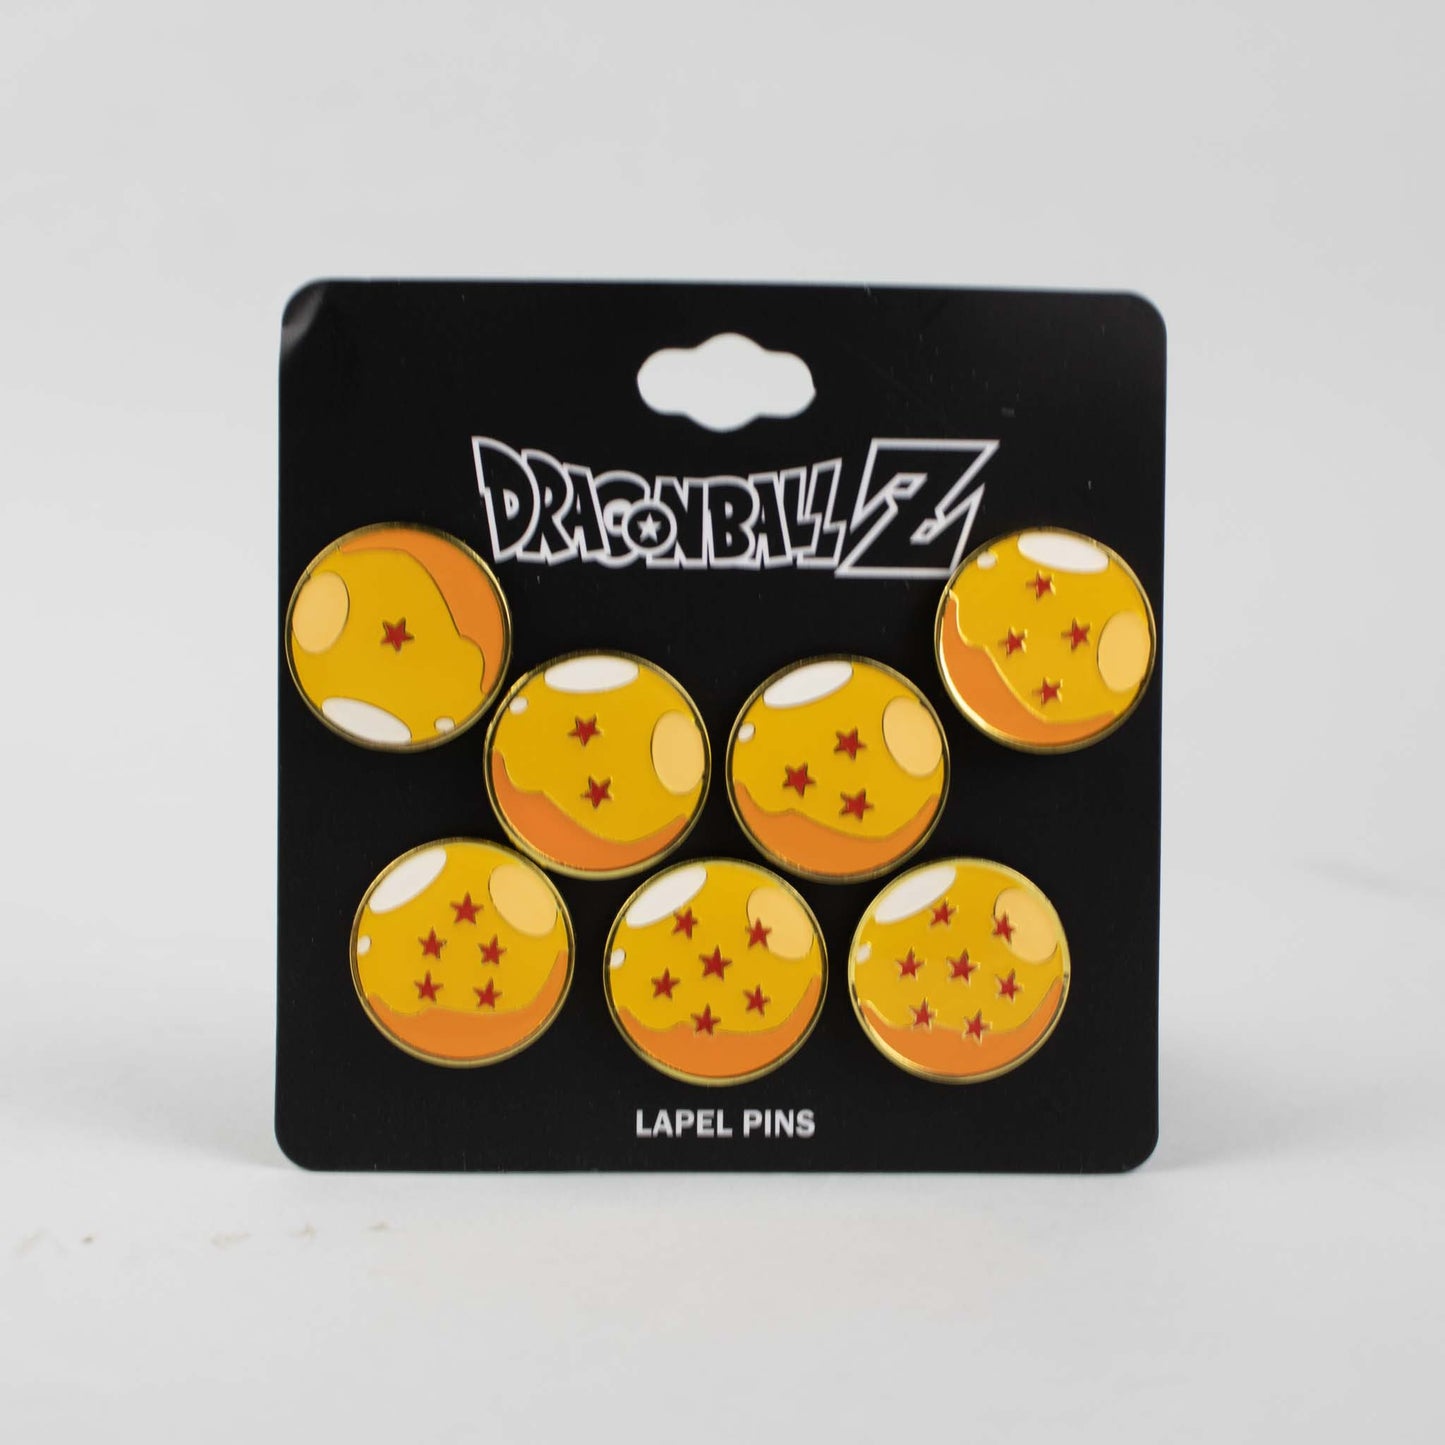 Dragon Ball Heroes Pins and Buttons for Sale